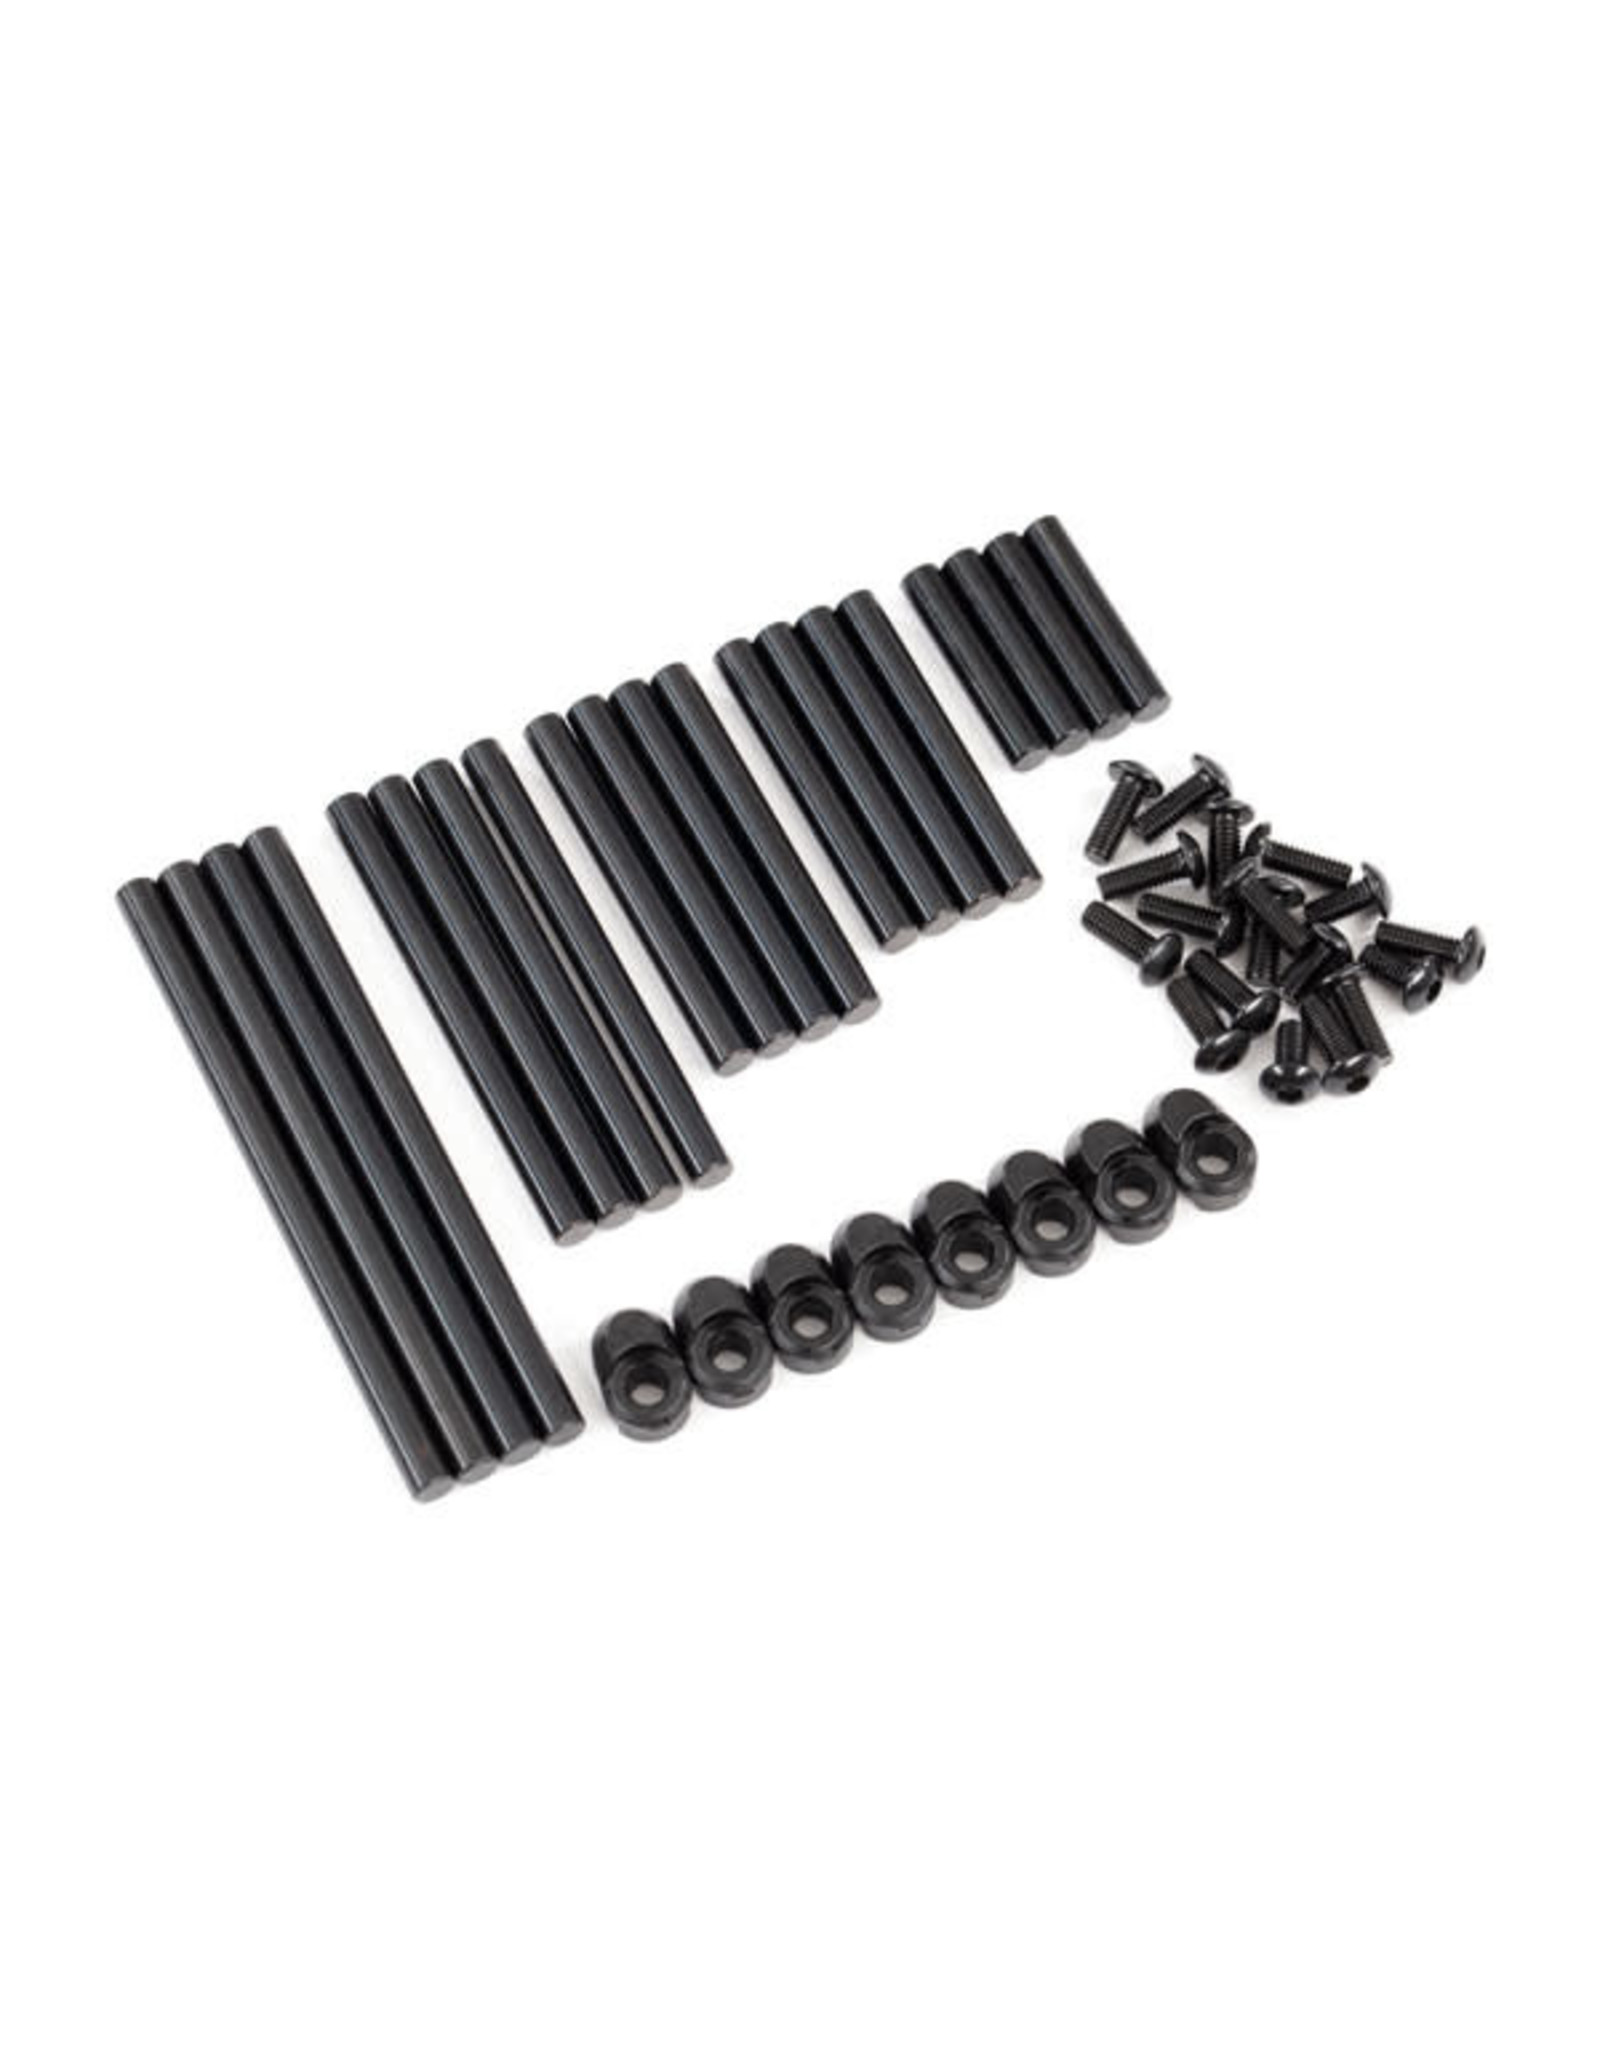 Traxxas Suspension pin set, complete (hardened steel), 4x64mm (4), 4x22mm (4), 4x38mm (4), 4x33mm (4), 4x47mm (4)/ 3x8mm BCS (14)/ 3x6mm BCS (4)/ retainers (8)